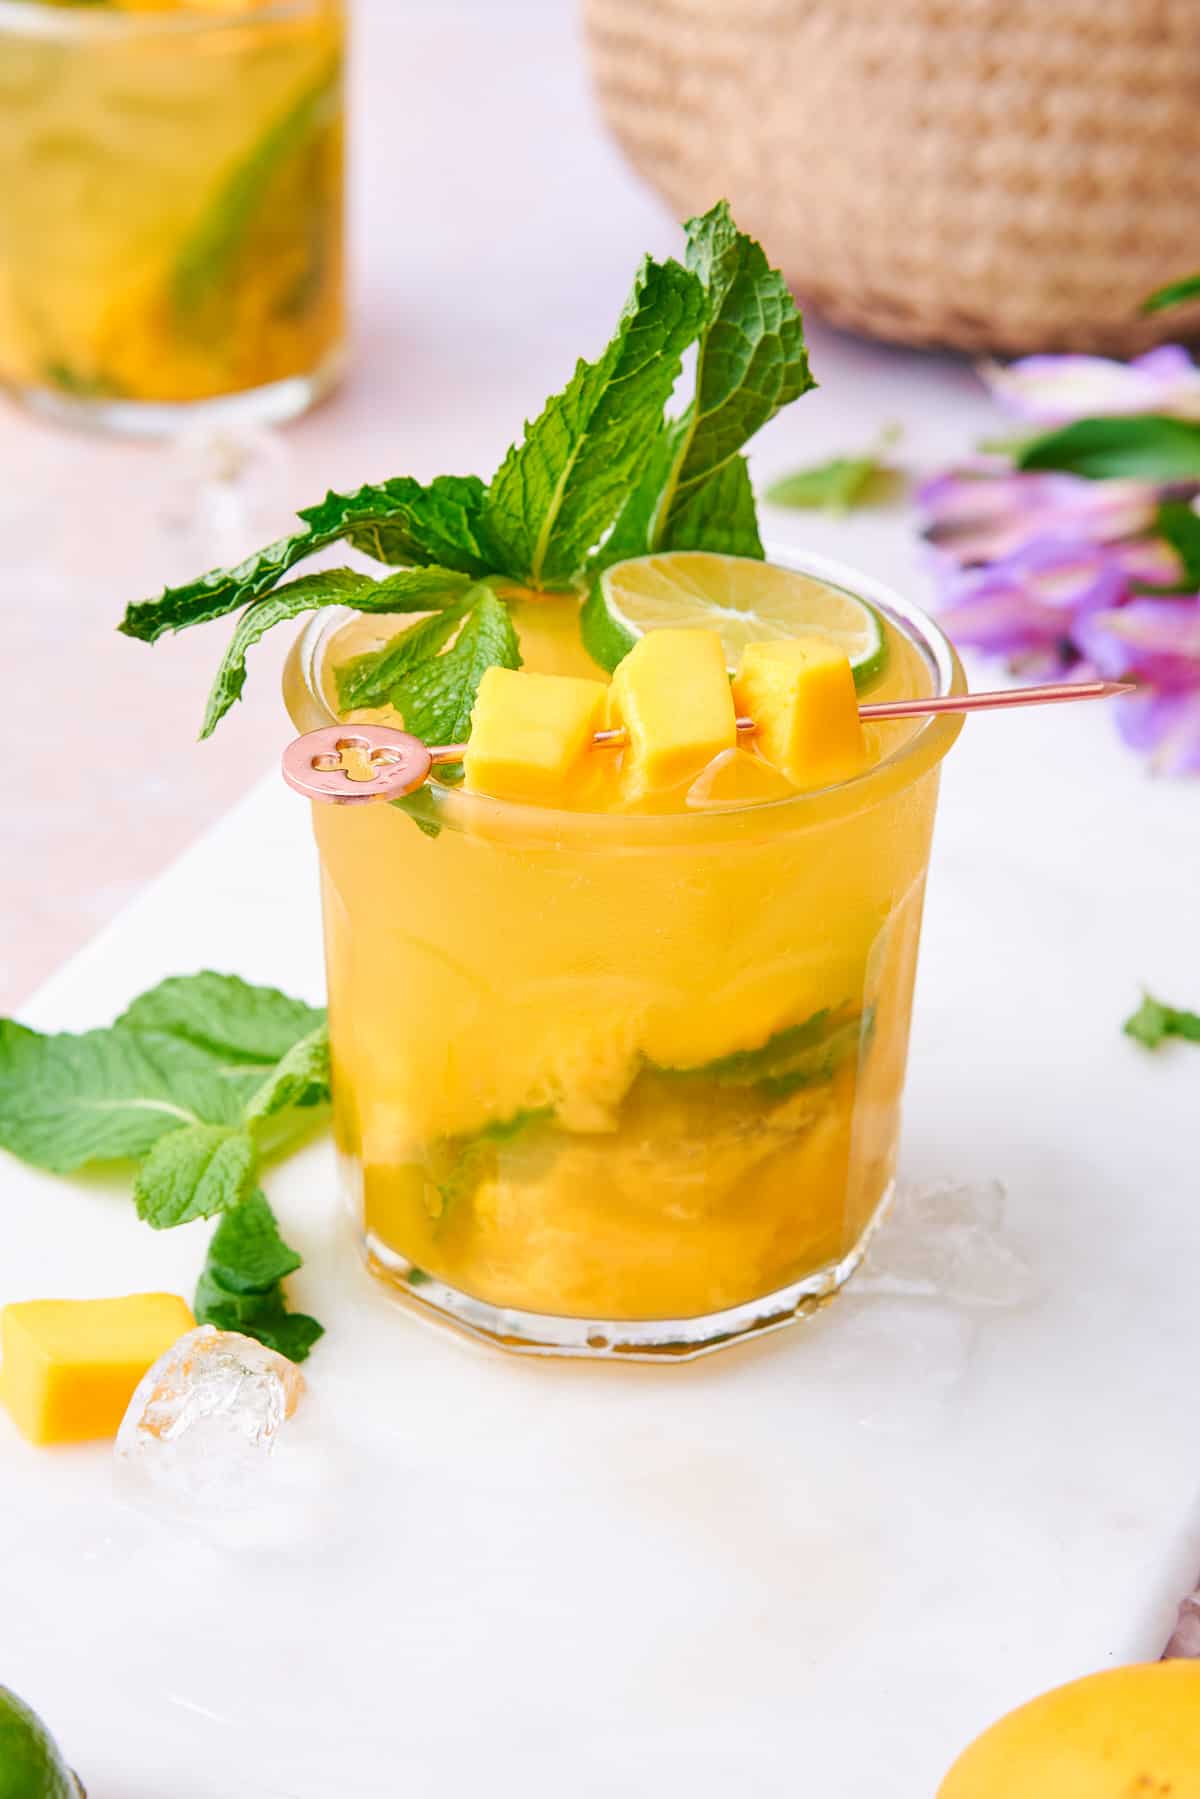 Garnishing the mango cocktail with mango chunks, lime slices, and mint leaves.